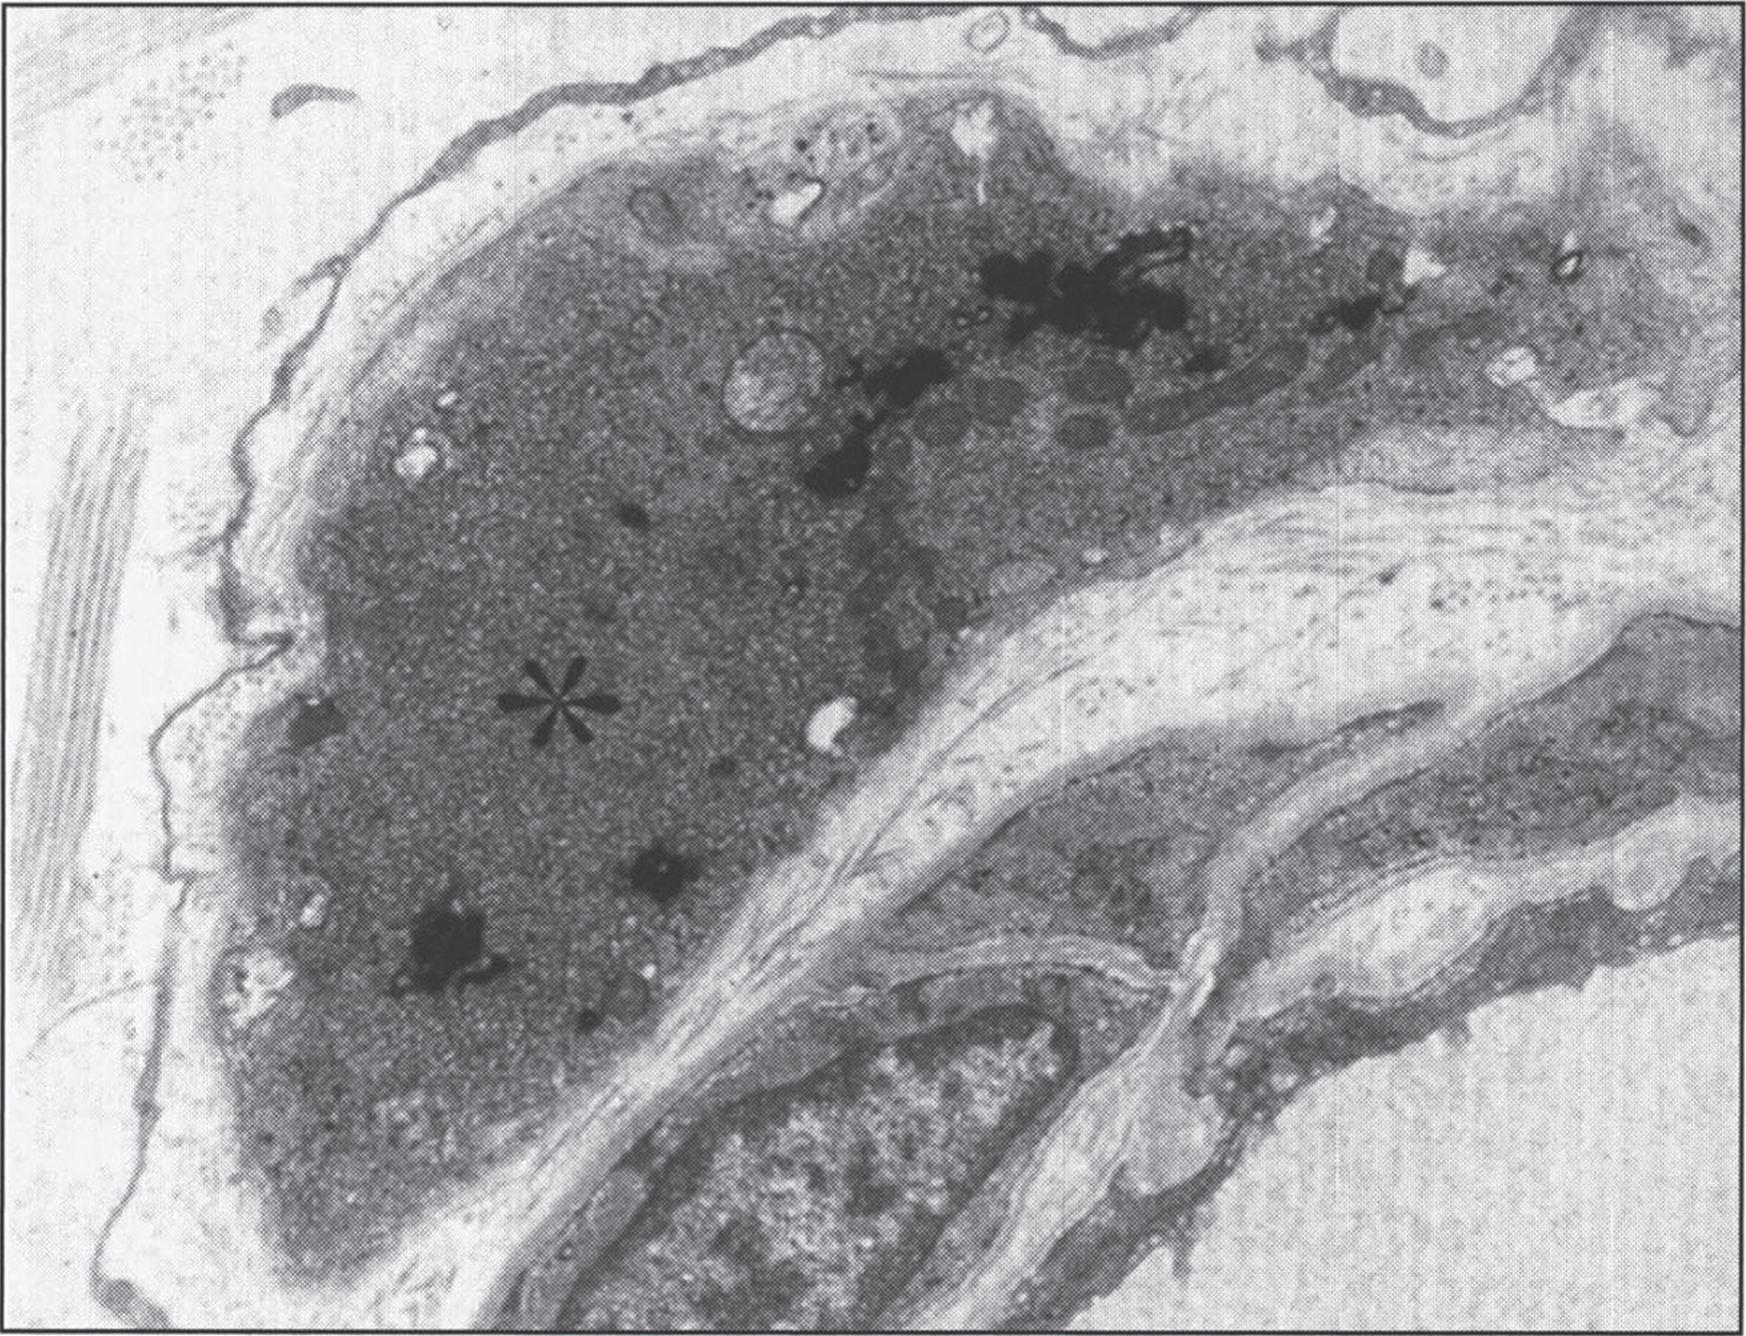 Infantile neuroaxonal dystrophy. A portion of one of the unmyelinated axons (asterisk) in this conjuctival perivascular nerve is distended by an accumulation of tubulo-membranous structures, degenerate organelles, and amorphous electron-dense materials. With these, distinctive axonal “spheroids” become more condensed and display characteristic clefts. (Courtesy of Dr. Gary Mireau.)